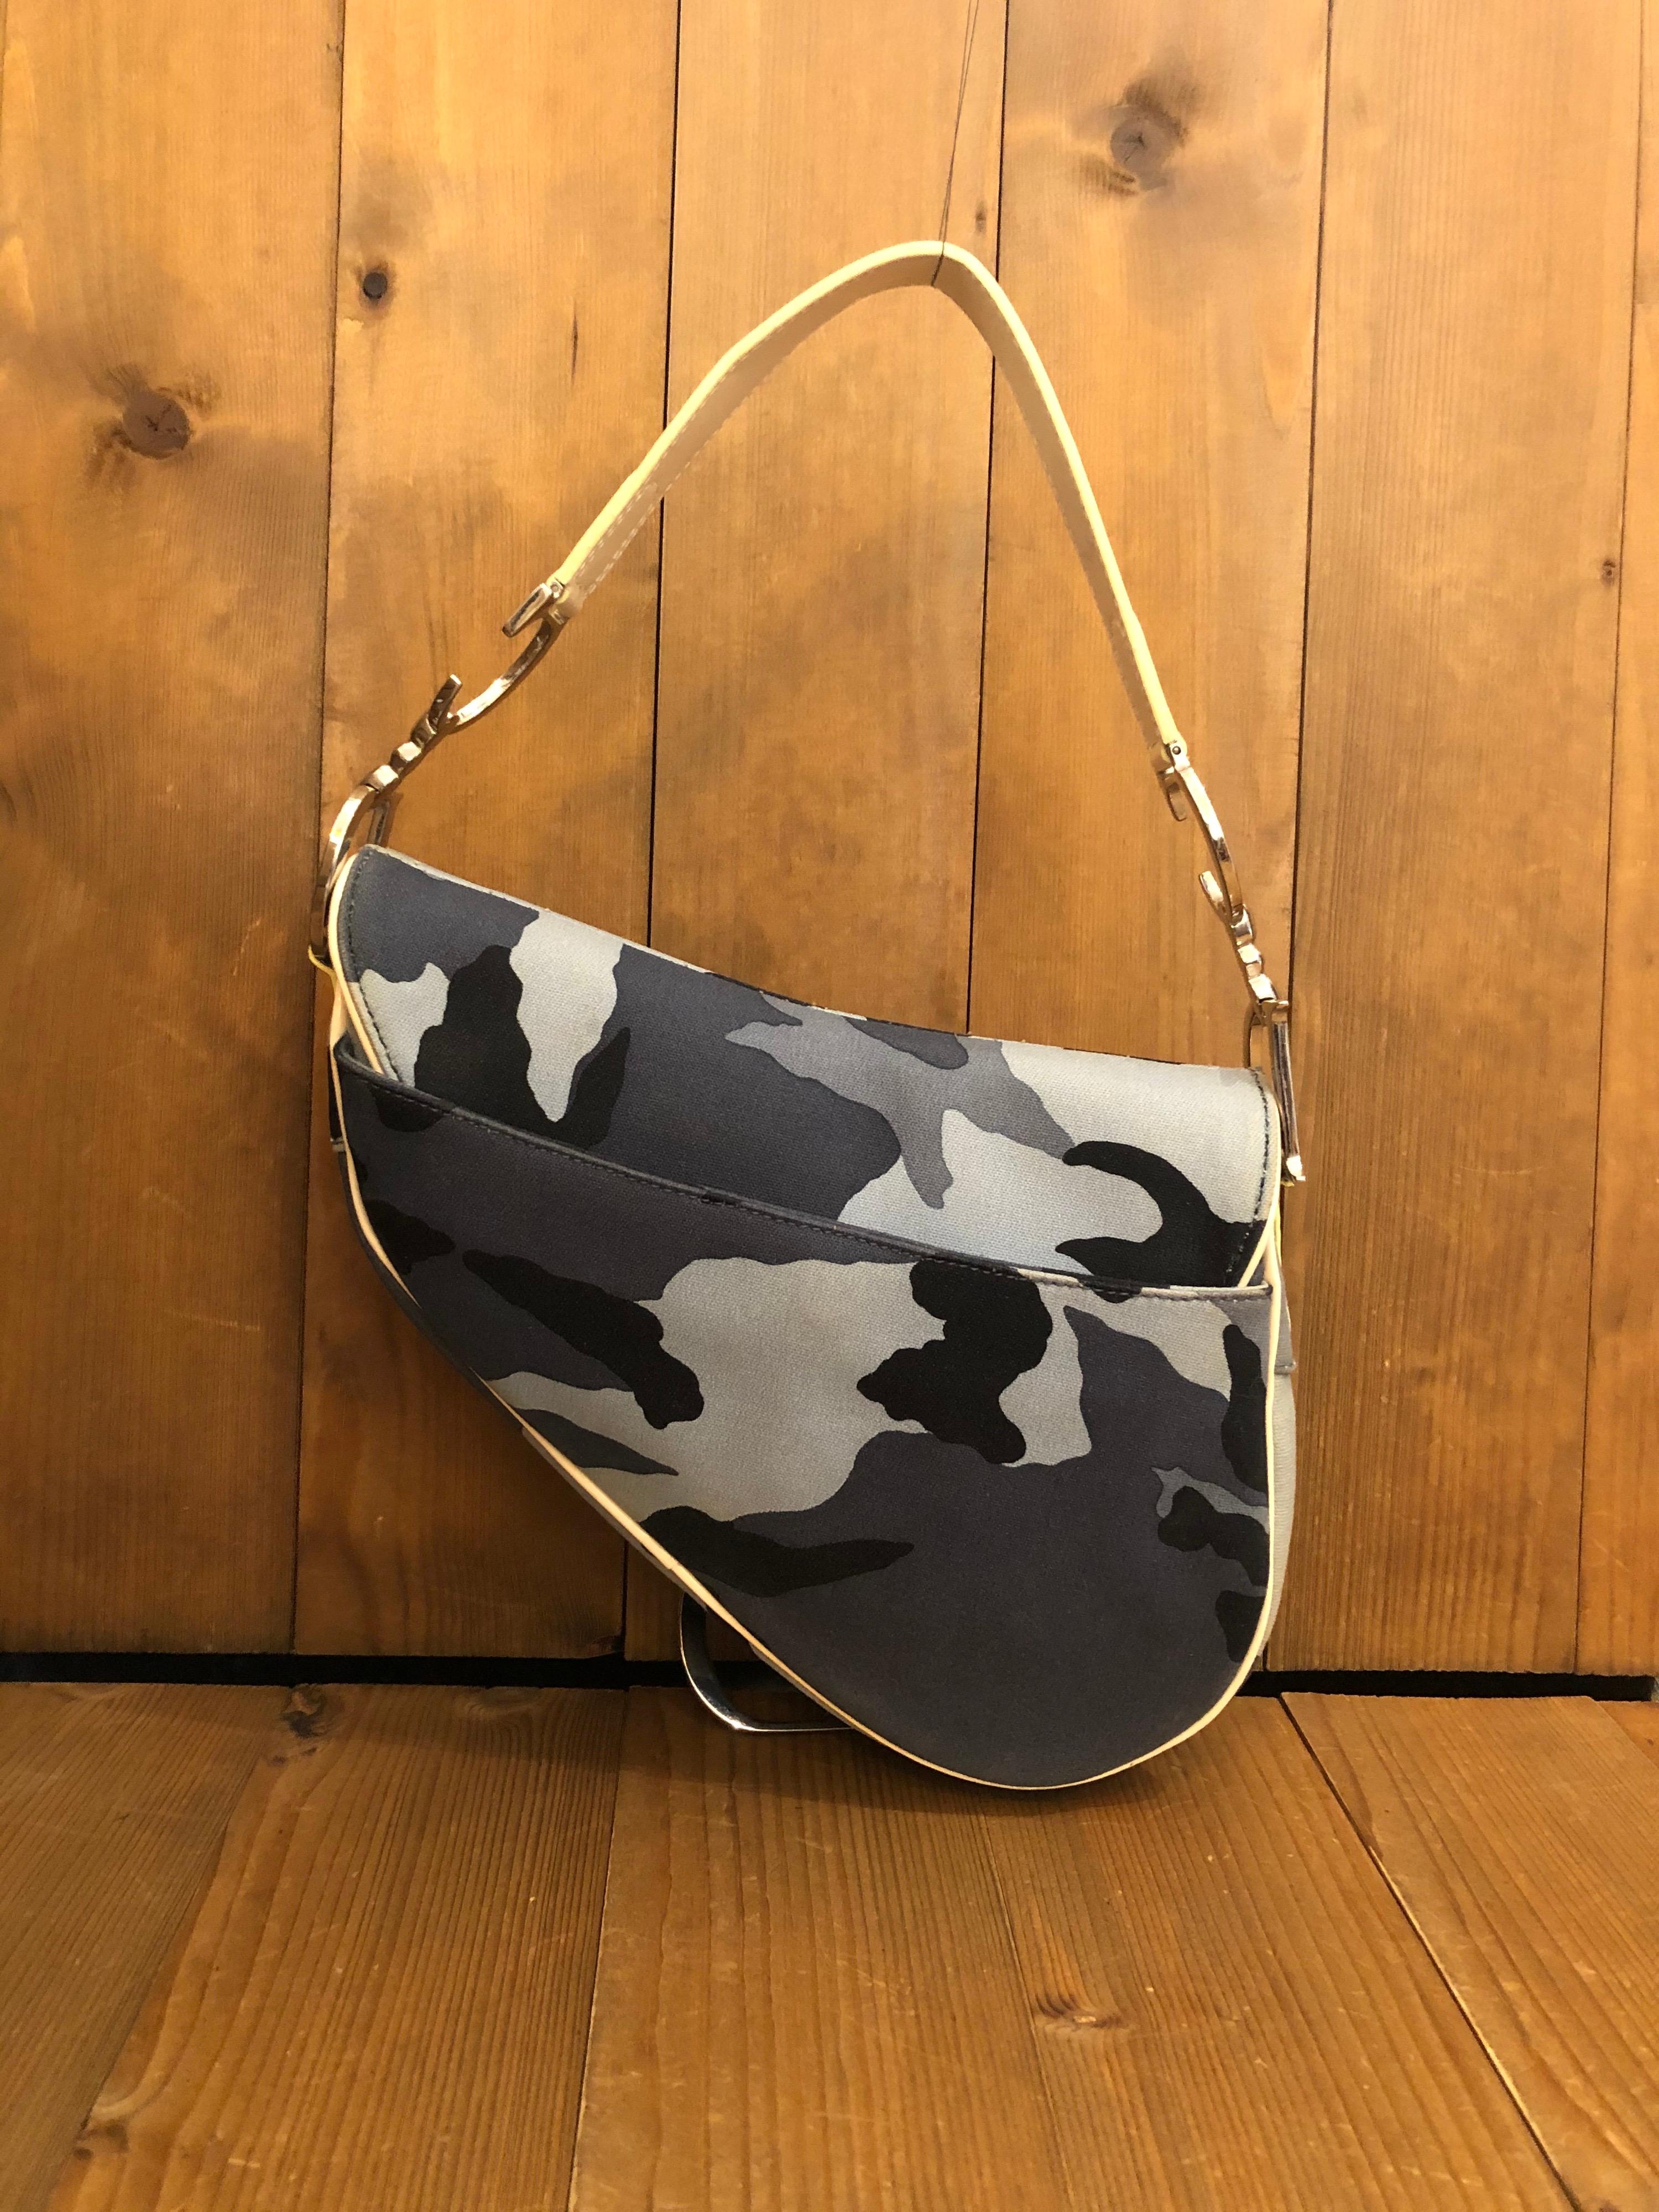 An iconic vintage Christian Dior Saddle Bag in Blue Camouflage Canvas and patent leather shoulder strap in ivory from the early 2000s under the influence of John Galliano. Made in Italy. Measures 24 x 20.25 x 5 cm Drop 17.75 cm (9.5 x 8 x 2 inches